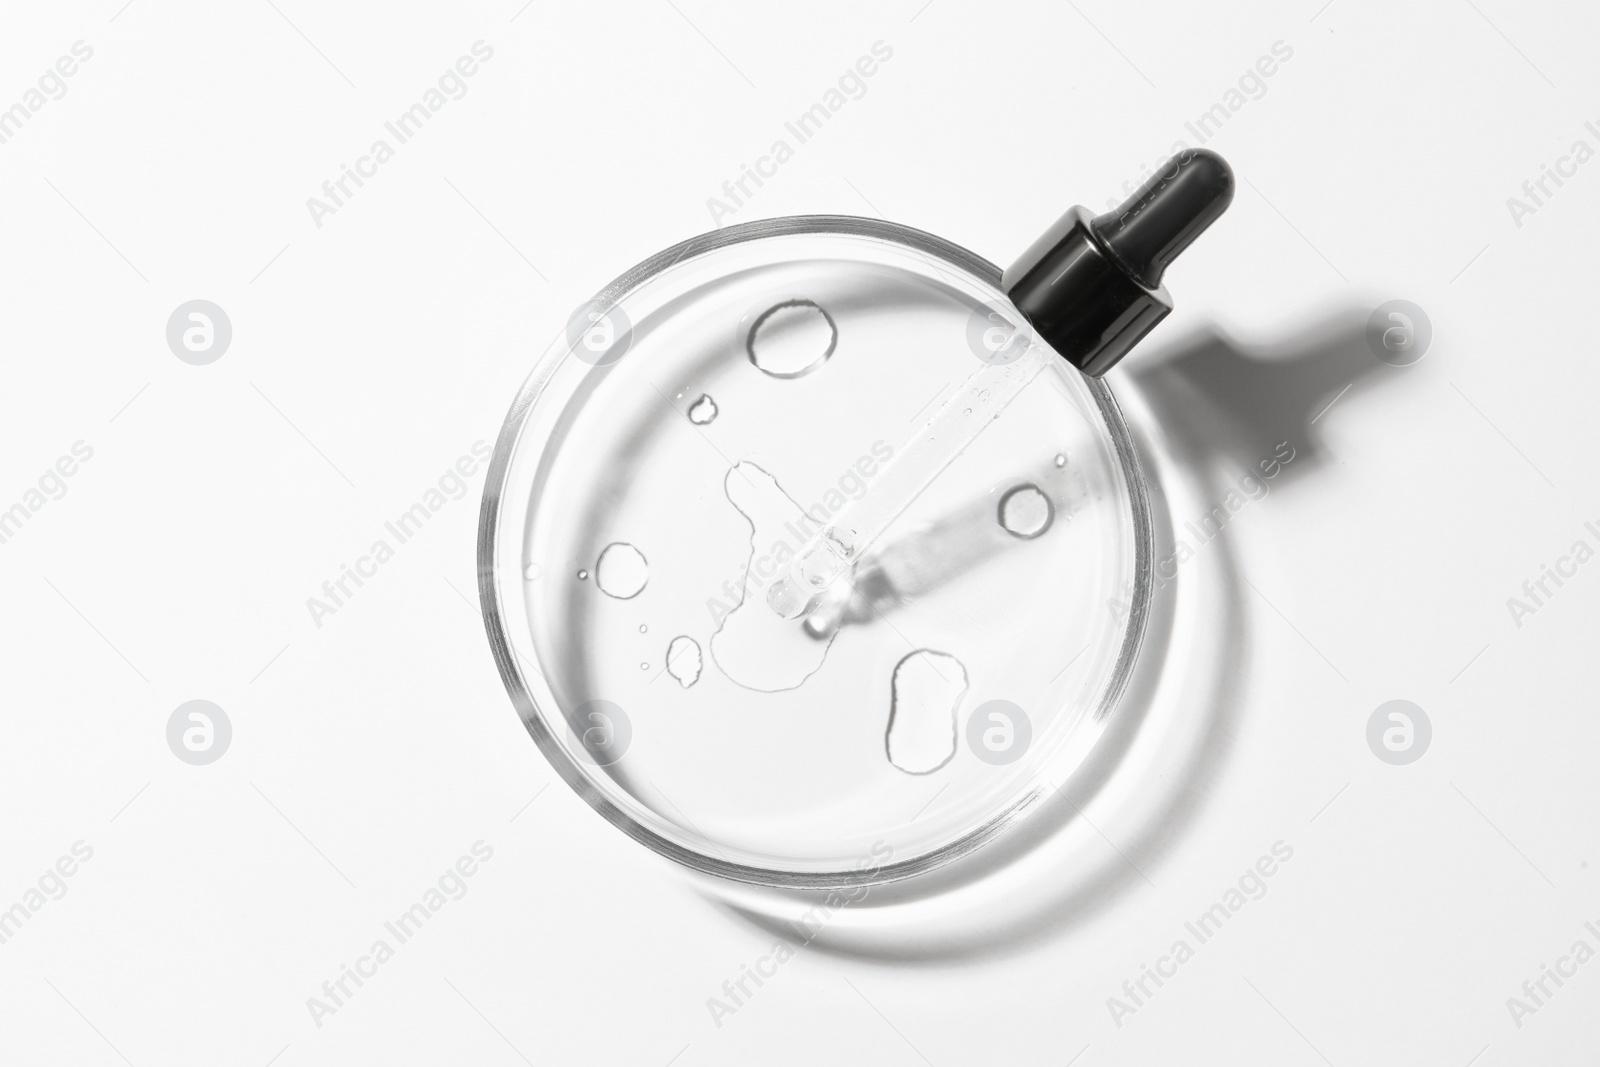 Photo of Petri dish with pipette on white background, top view